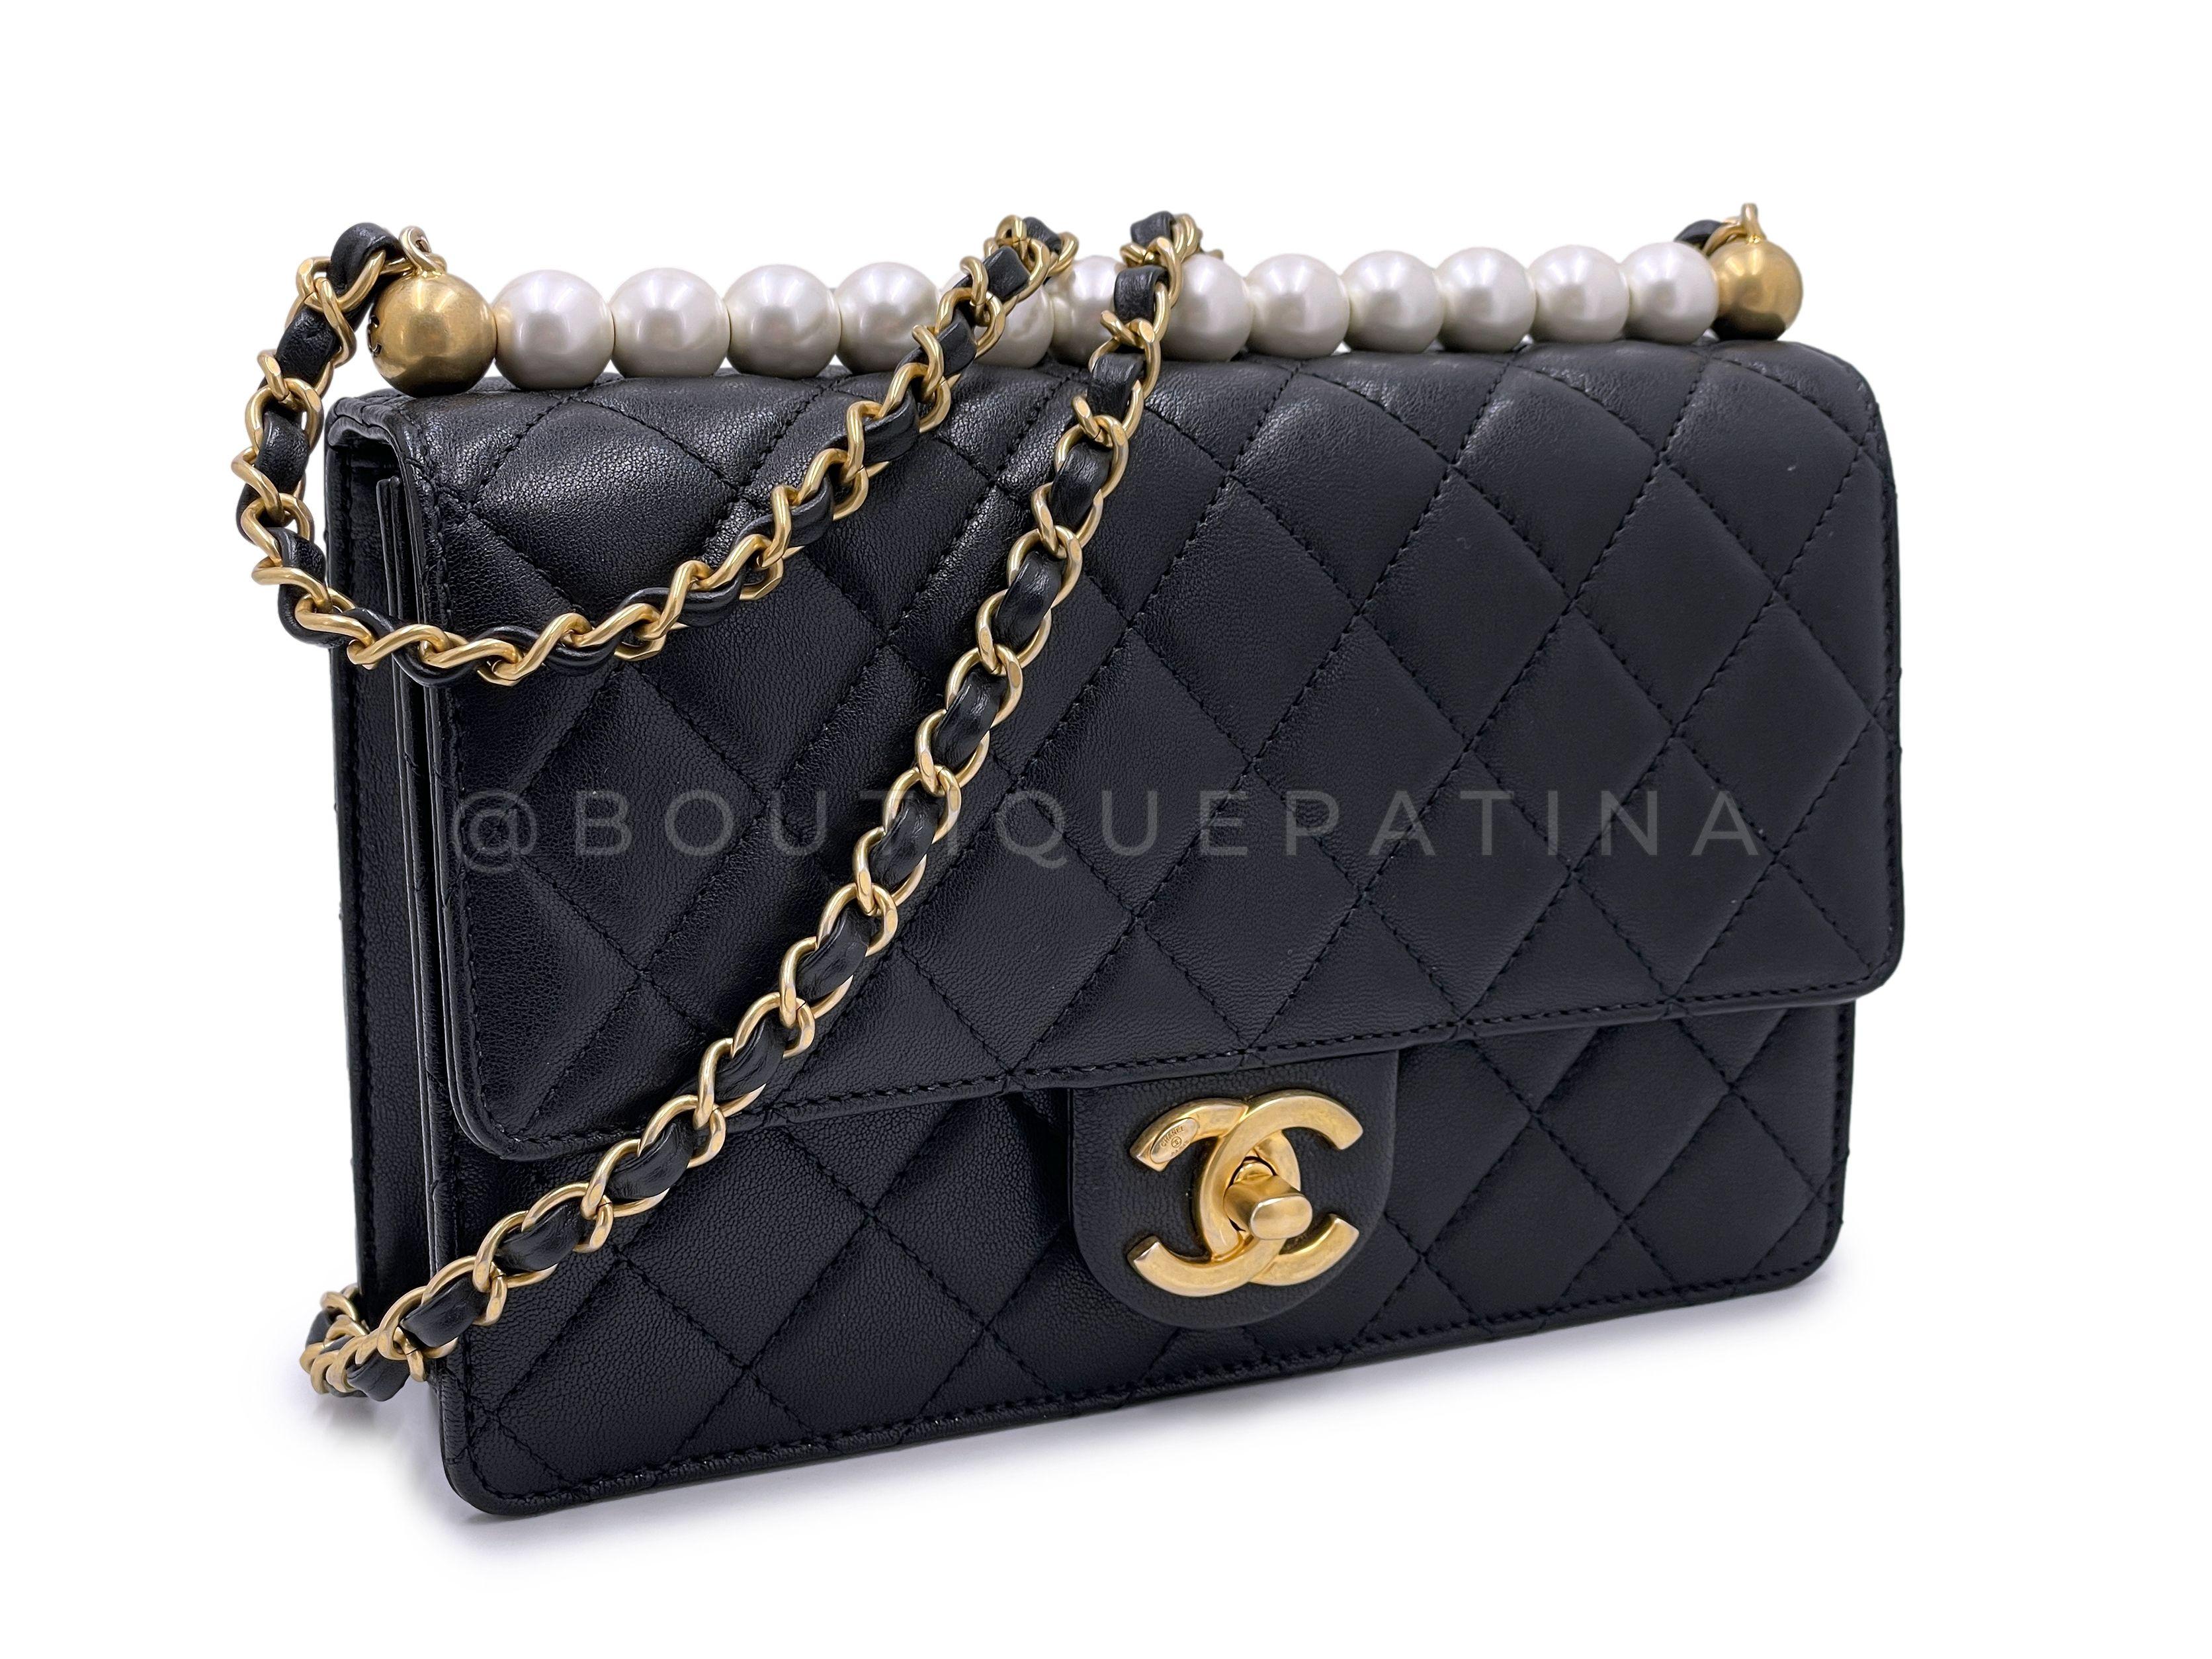 Store item: 66675
The iconic holy grail bag is the Chanel Classic Flap. Coveted for its simplicity and elegance - single woven chain, turnlock CC clasp, lambskin interior.

A unique and hard-to-find variation of the Chanel flaps is the luxurious